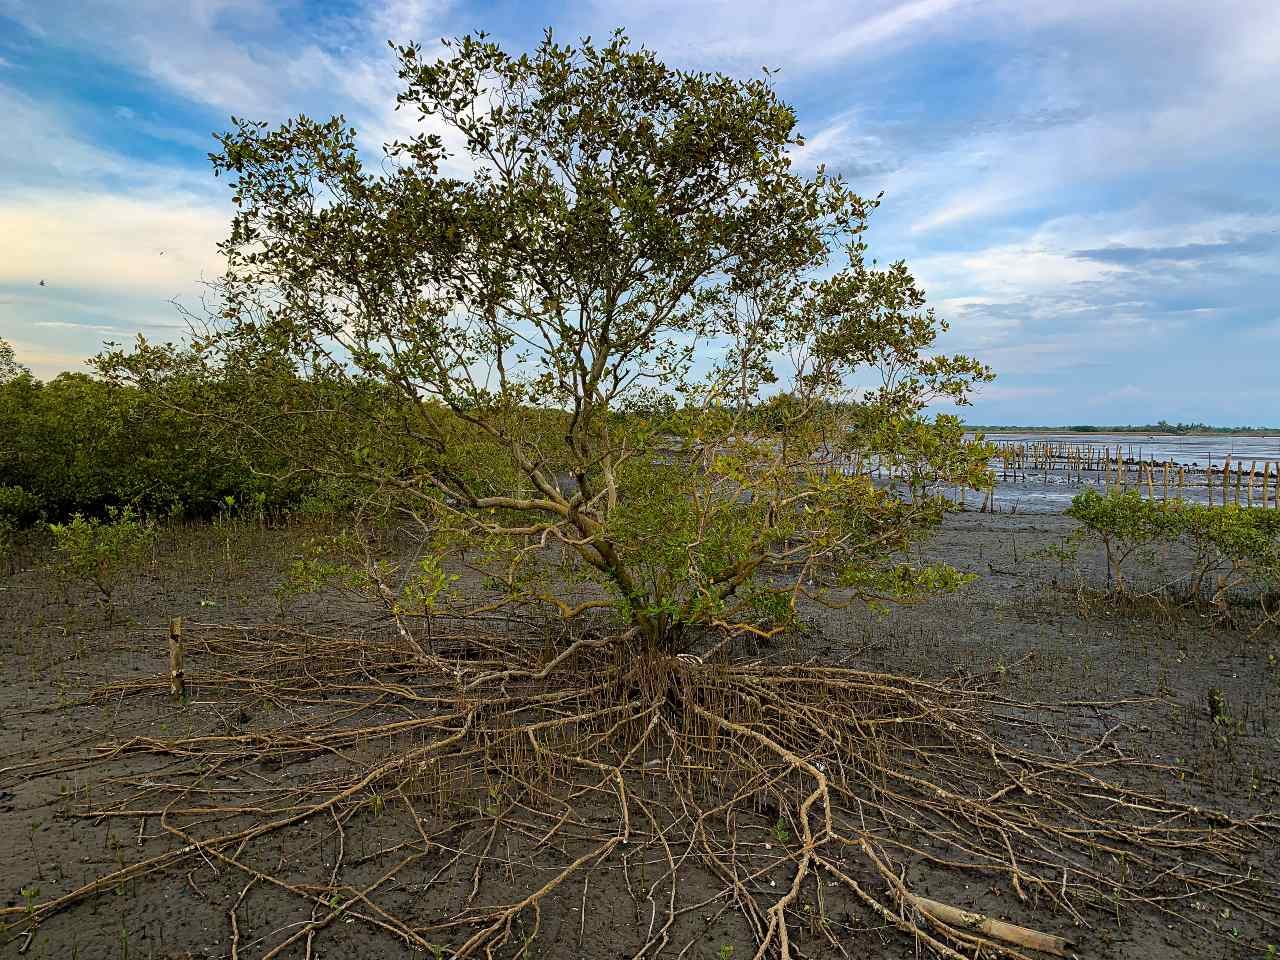 Envi groups form alliance to restore Philippine mangrove forests